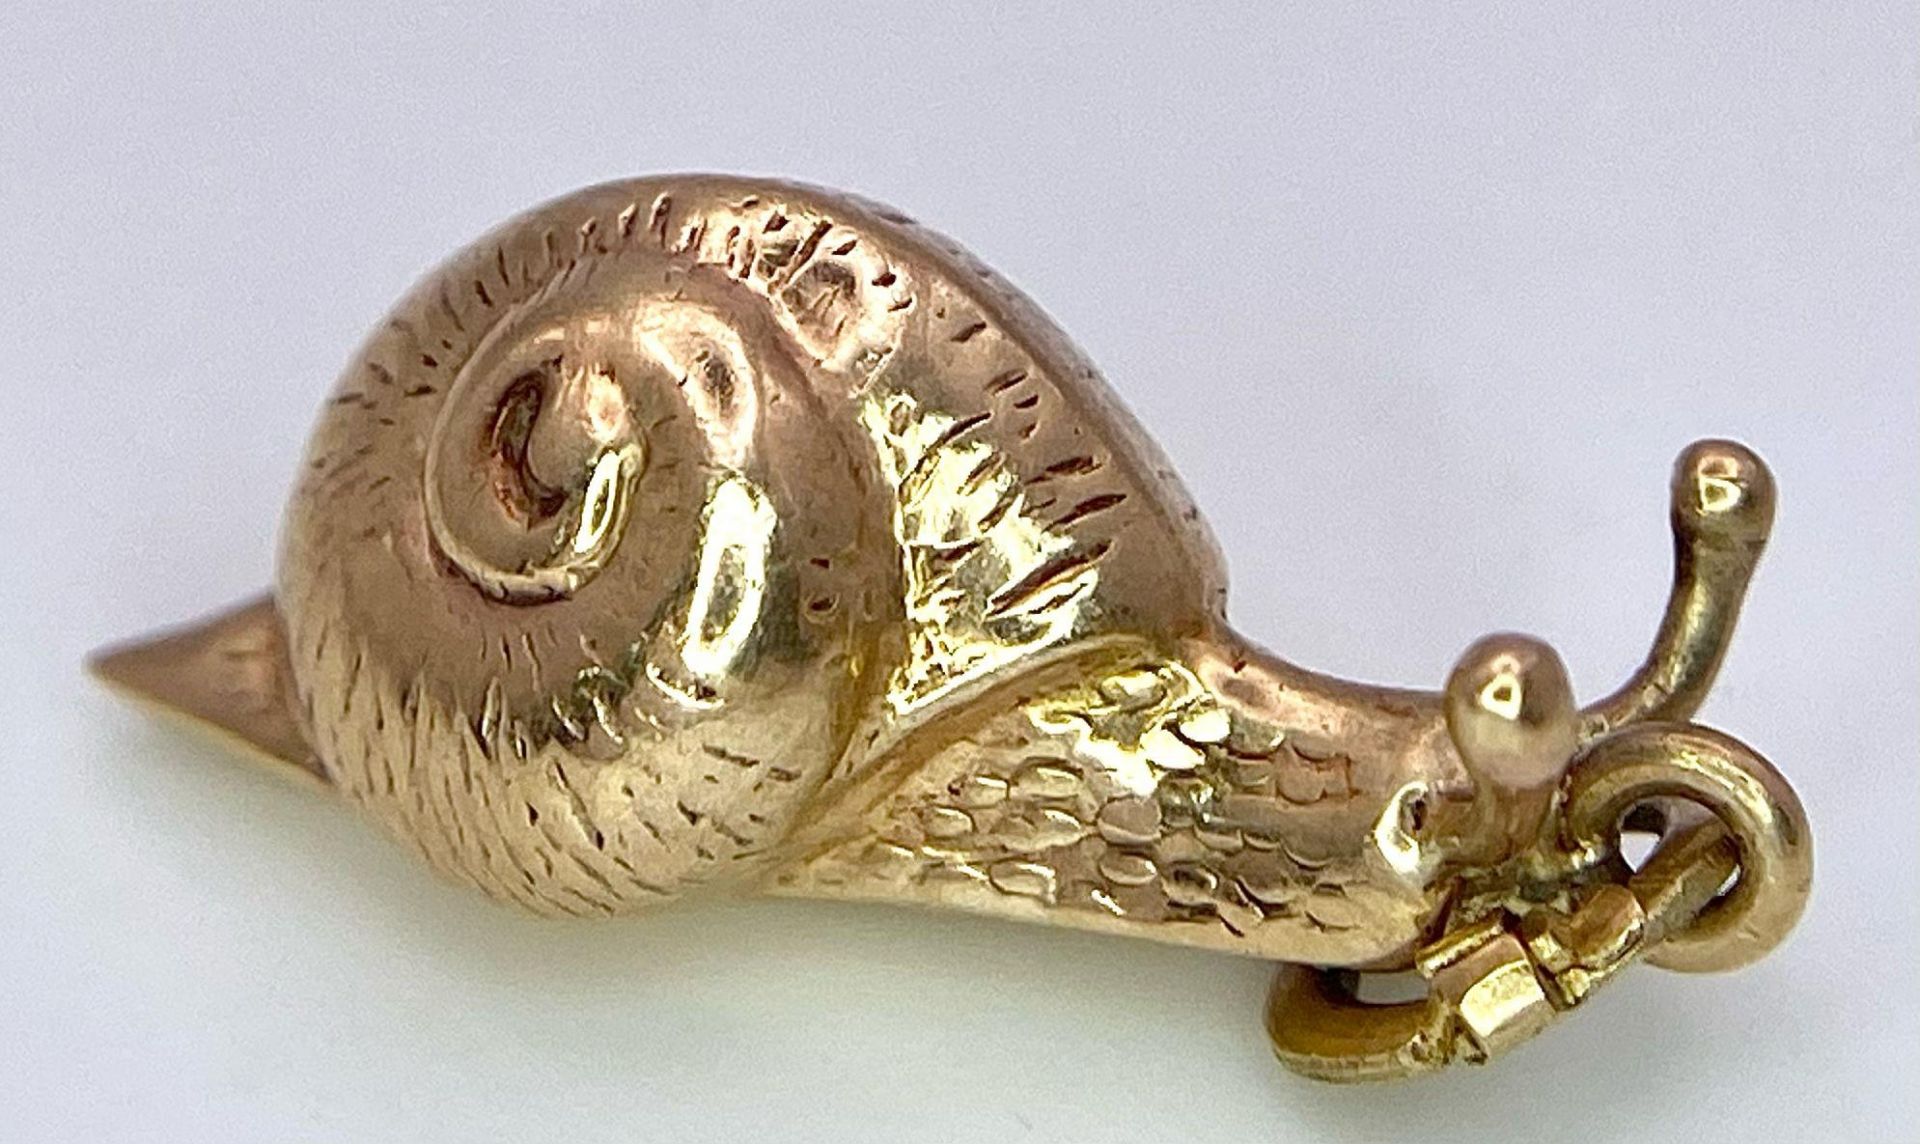 A 9K YELLOW GOLD SNAIL CHARM. TOTAL WEIGHT 0.8G